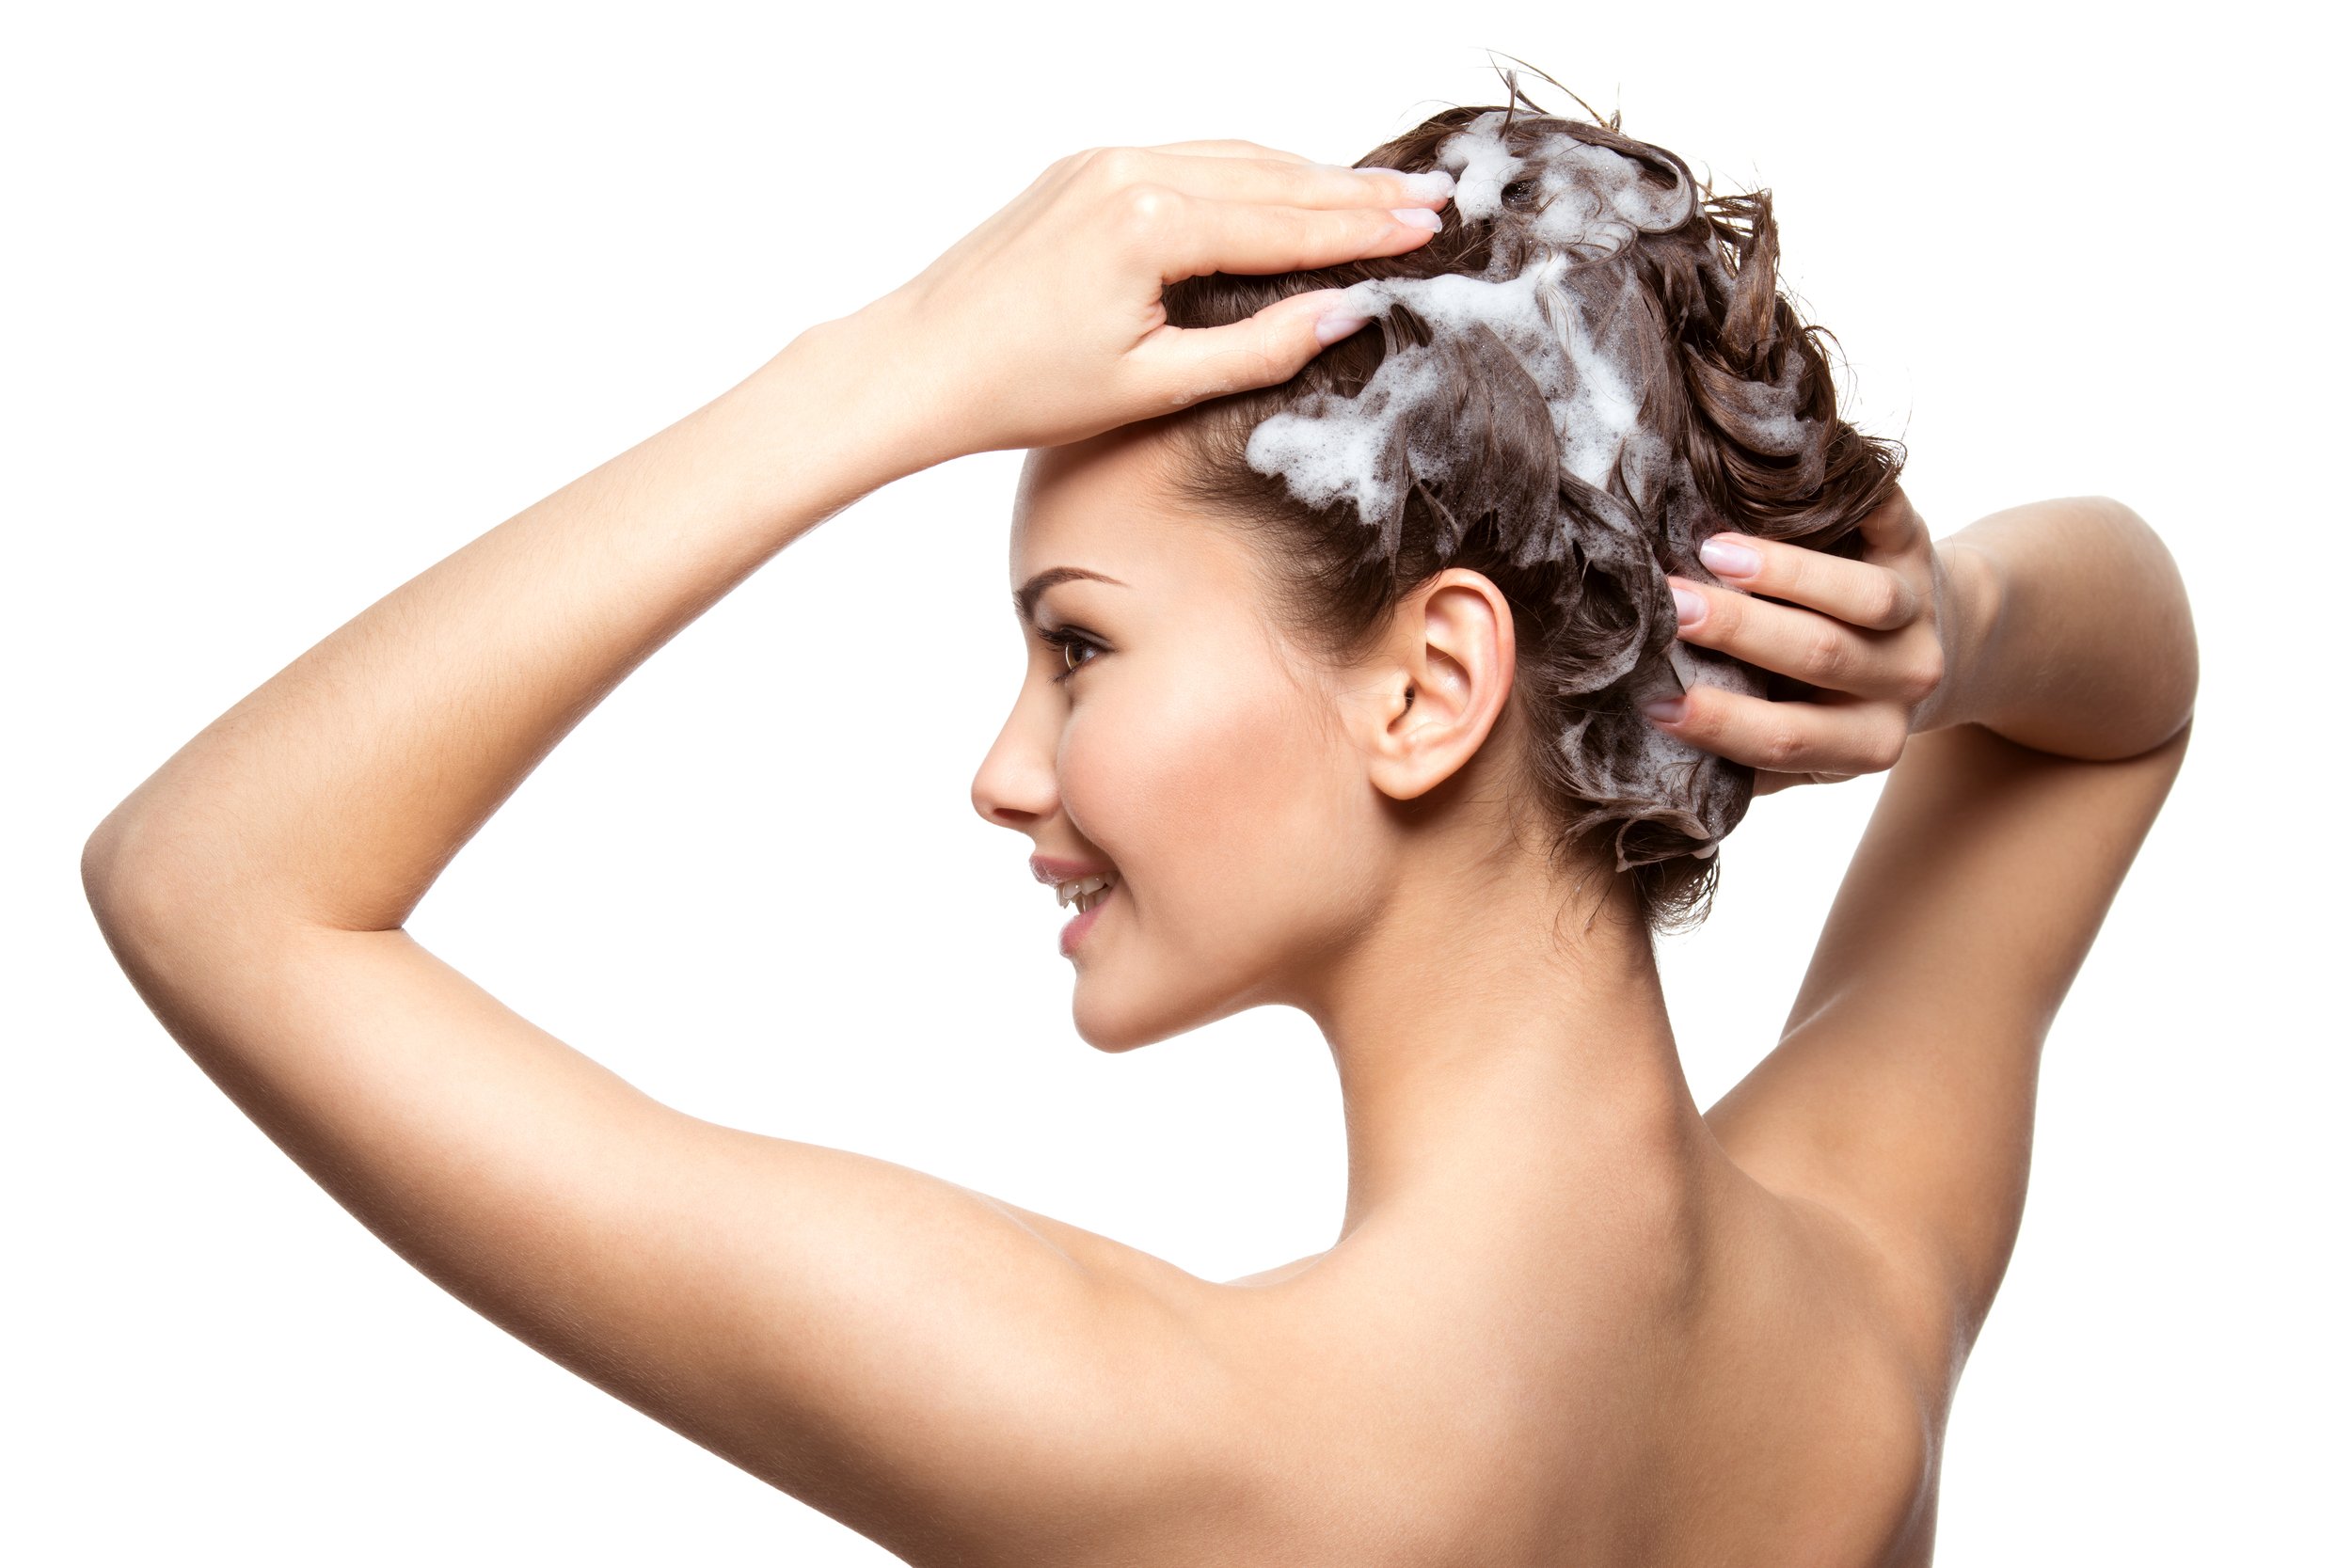 Choosing the Perfect Shampoo for Your Hair